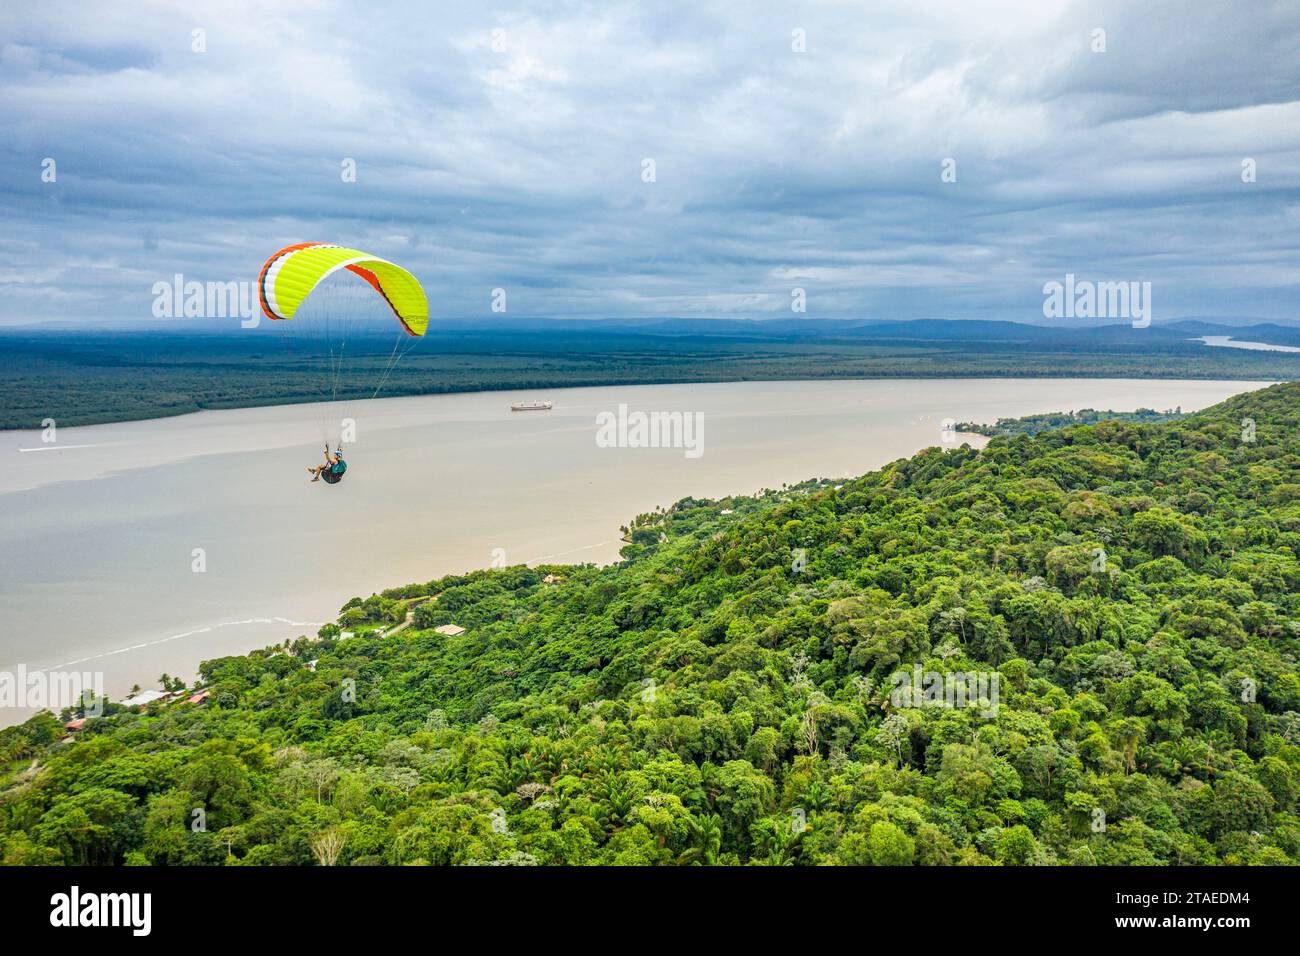 France, Guiana, Rémire-Montjoly, Paragliding above the Rorota trail, the Mahury river estuary in the background (aerial view) Stock Photo